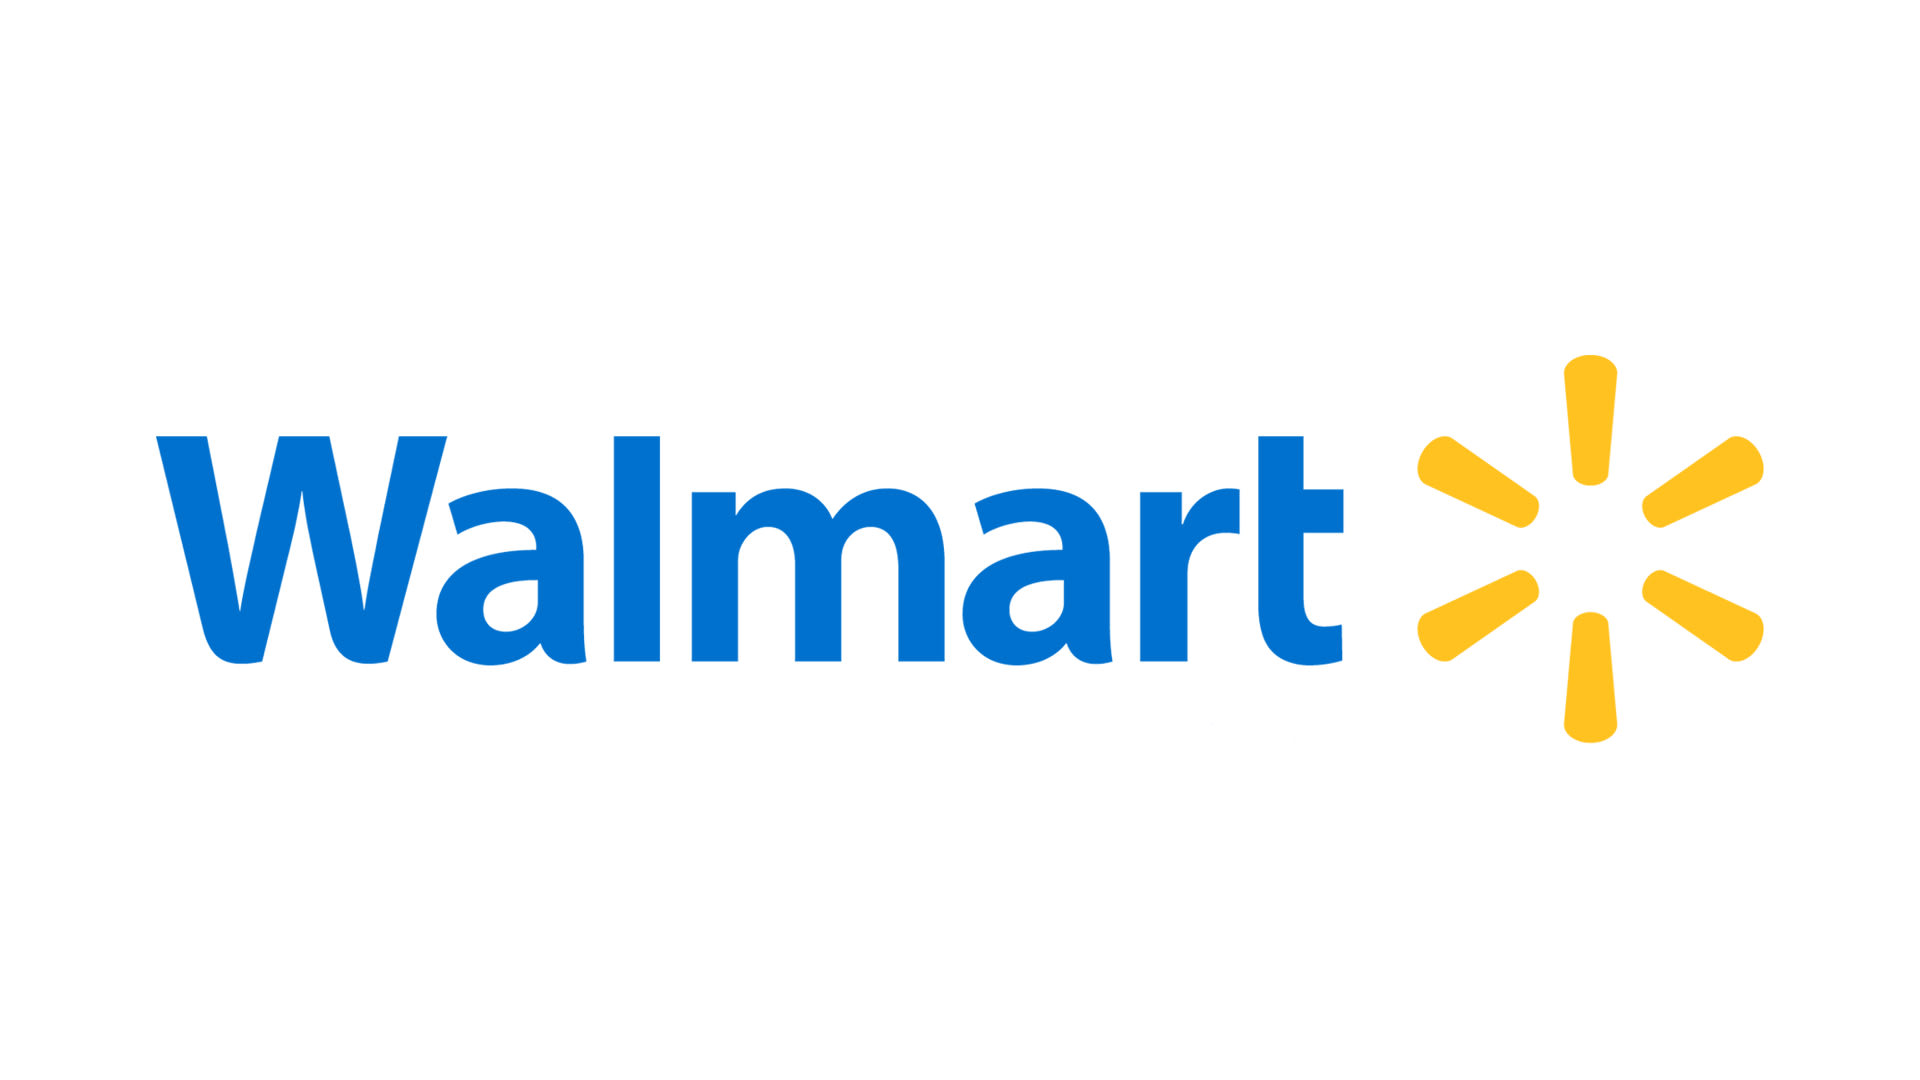 Click here to view more about this offer on the Walmart website